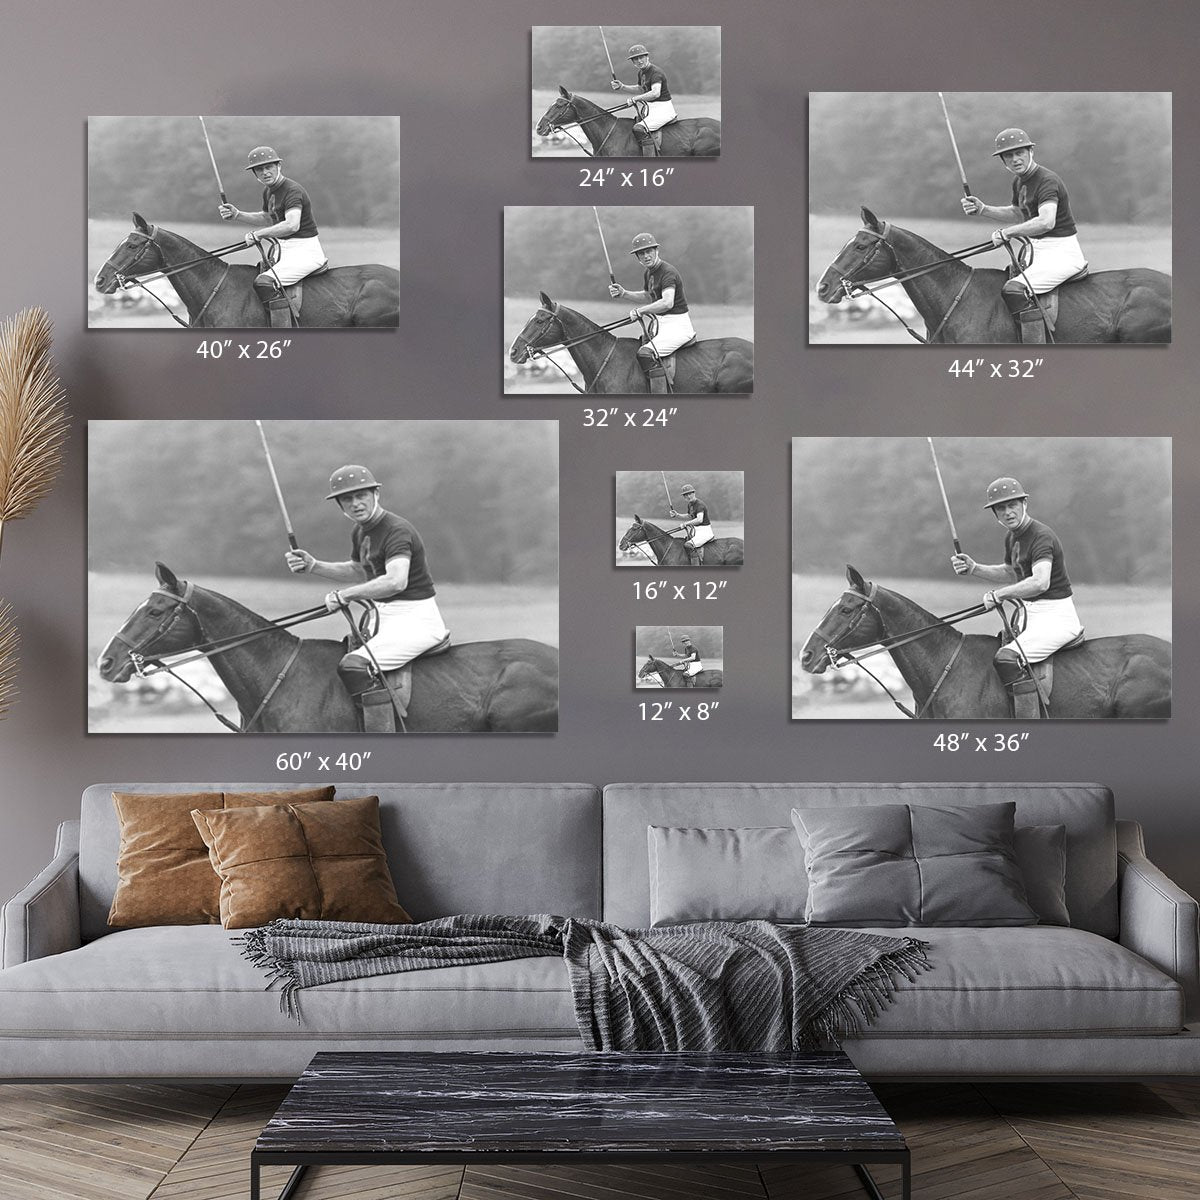 Prince Philip shown winning the polo Gold Cup Canvas Print or Poster